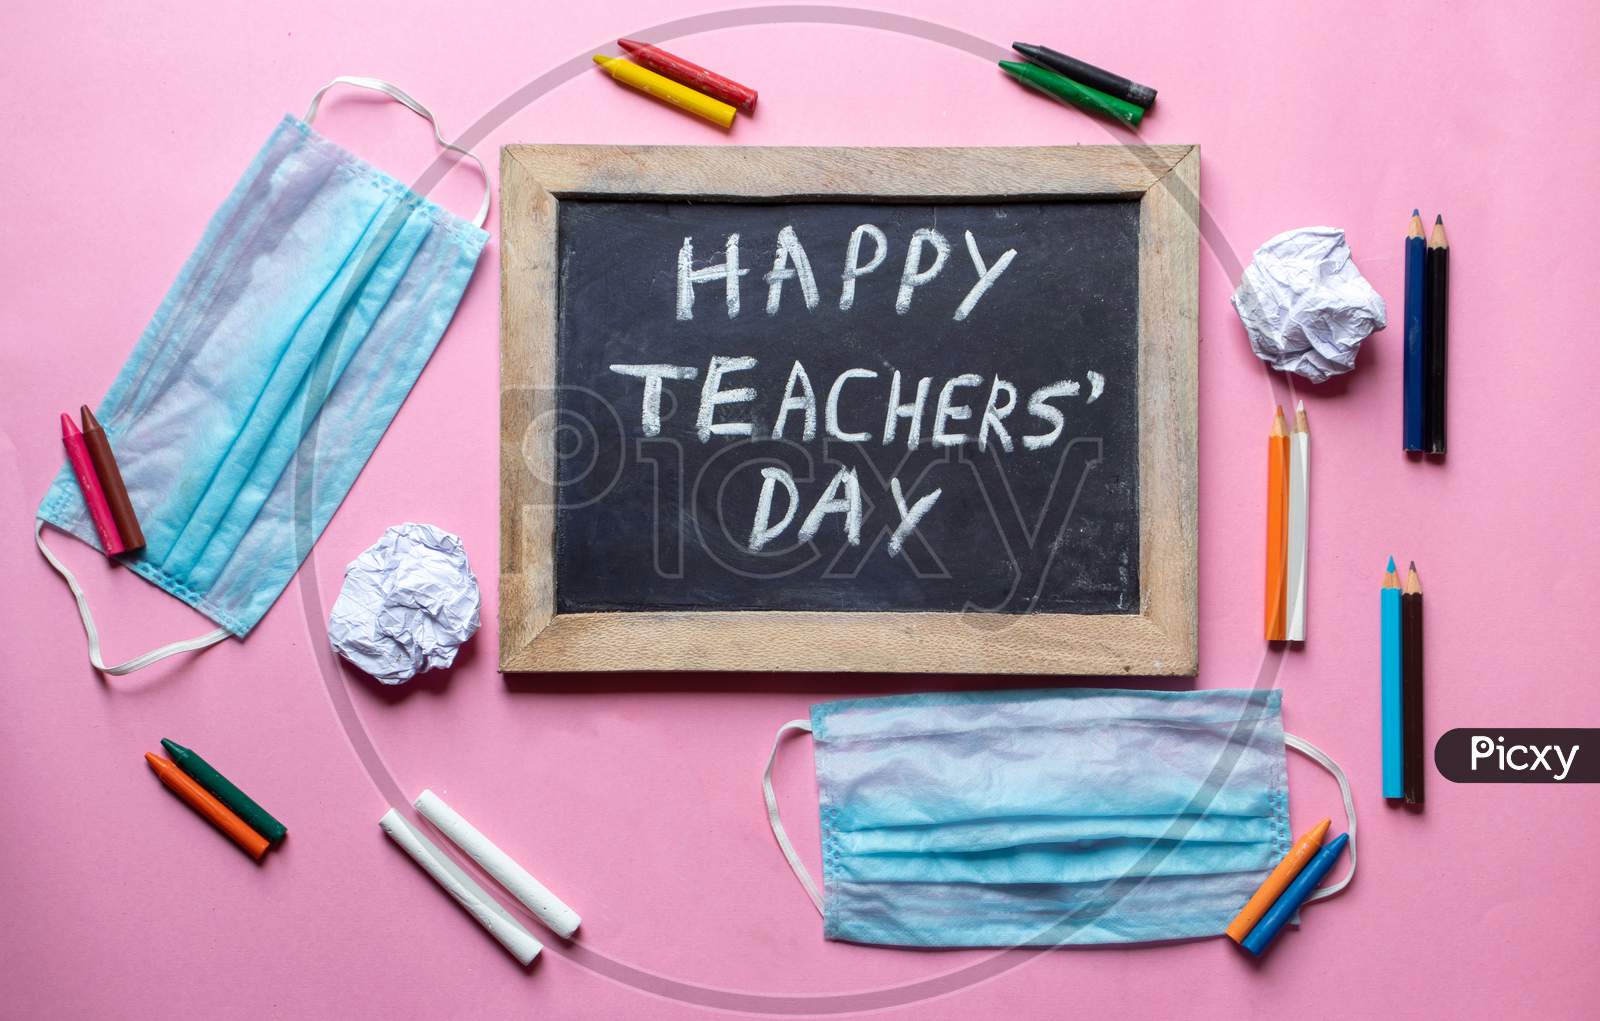 Happy Teacher's Day Creative Photo With Medical Face Mask, Chalkboard And Pencils Isolated On Pink Background, Perfect For Wallpaper